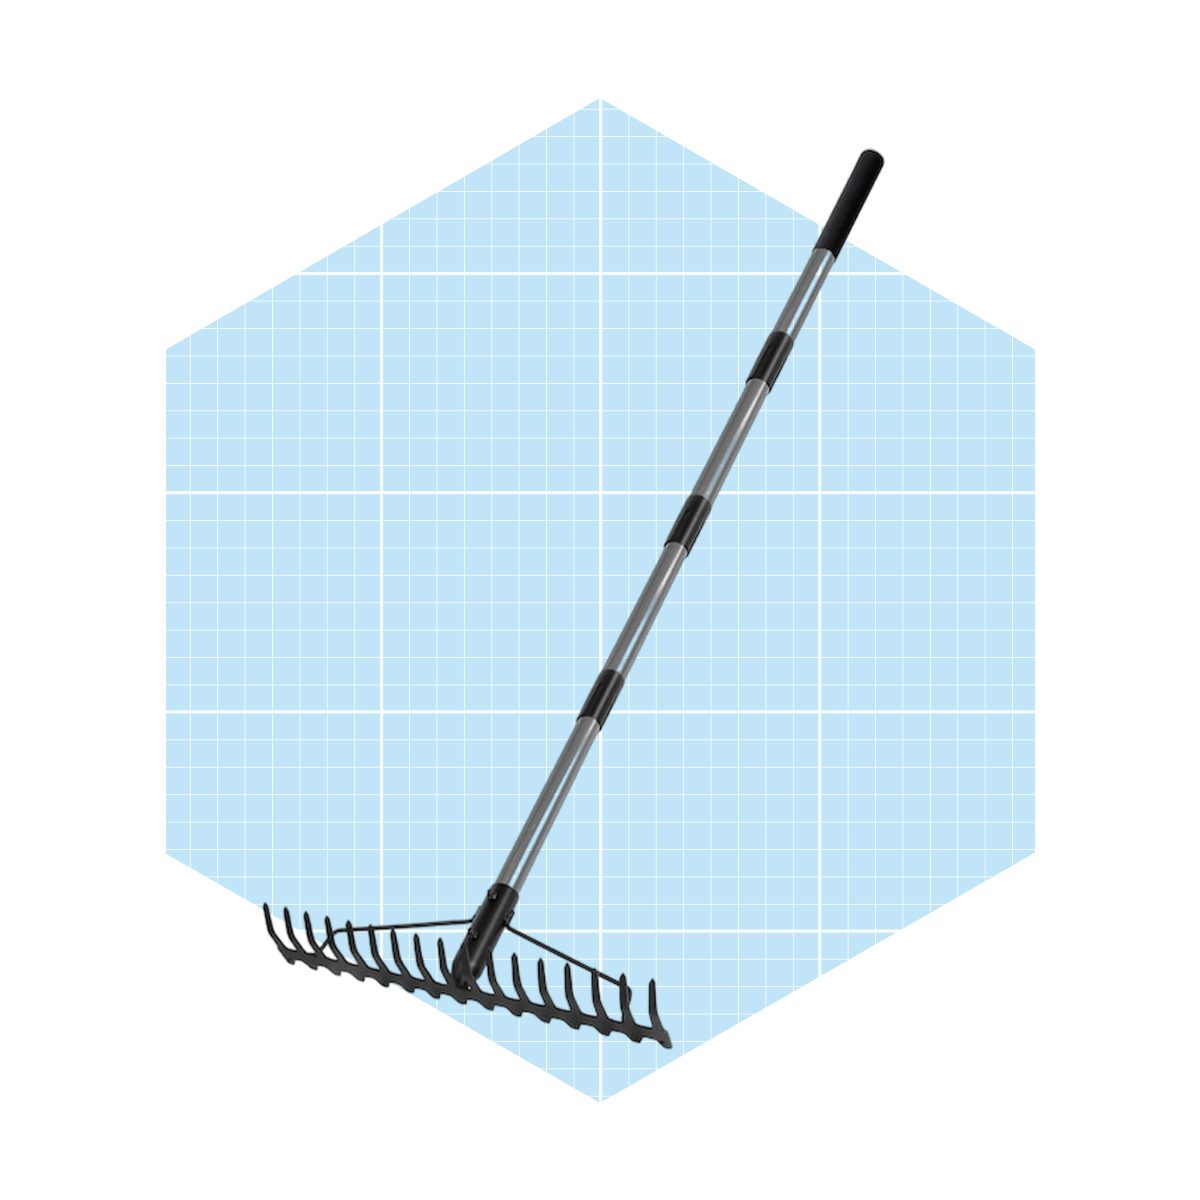 10 Types of Rakes and Their Uses